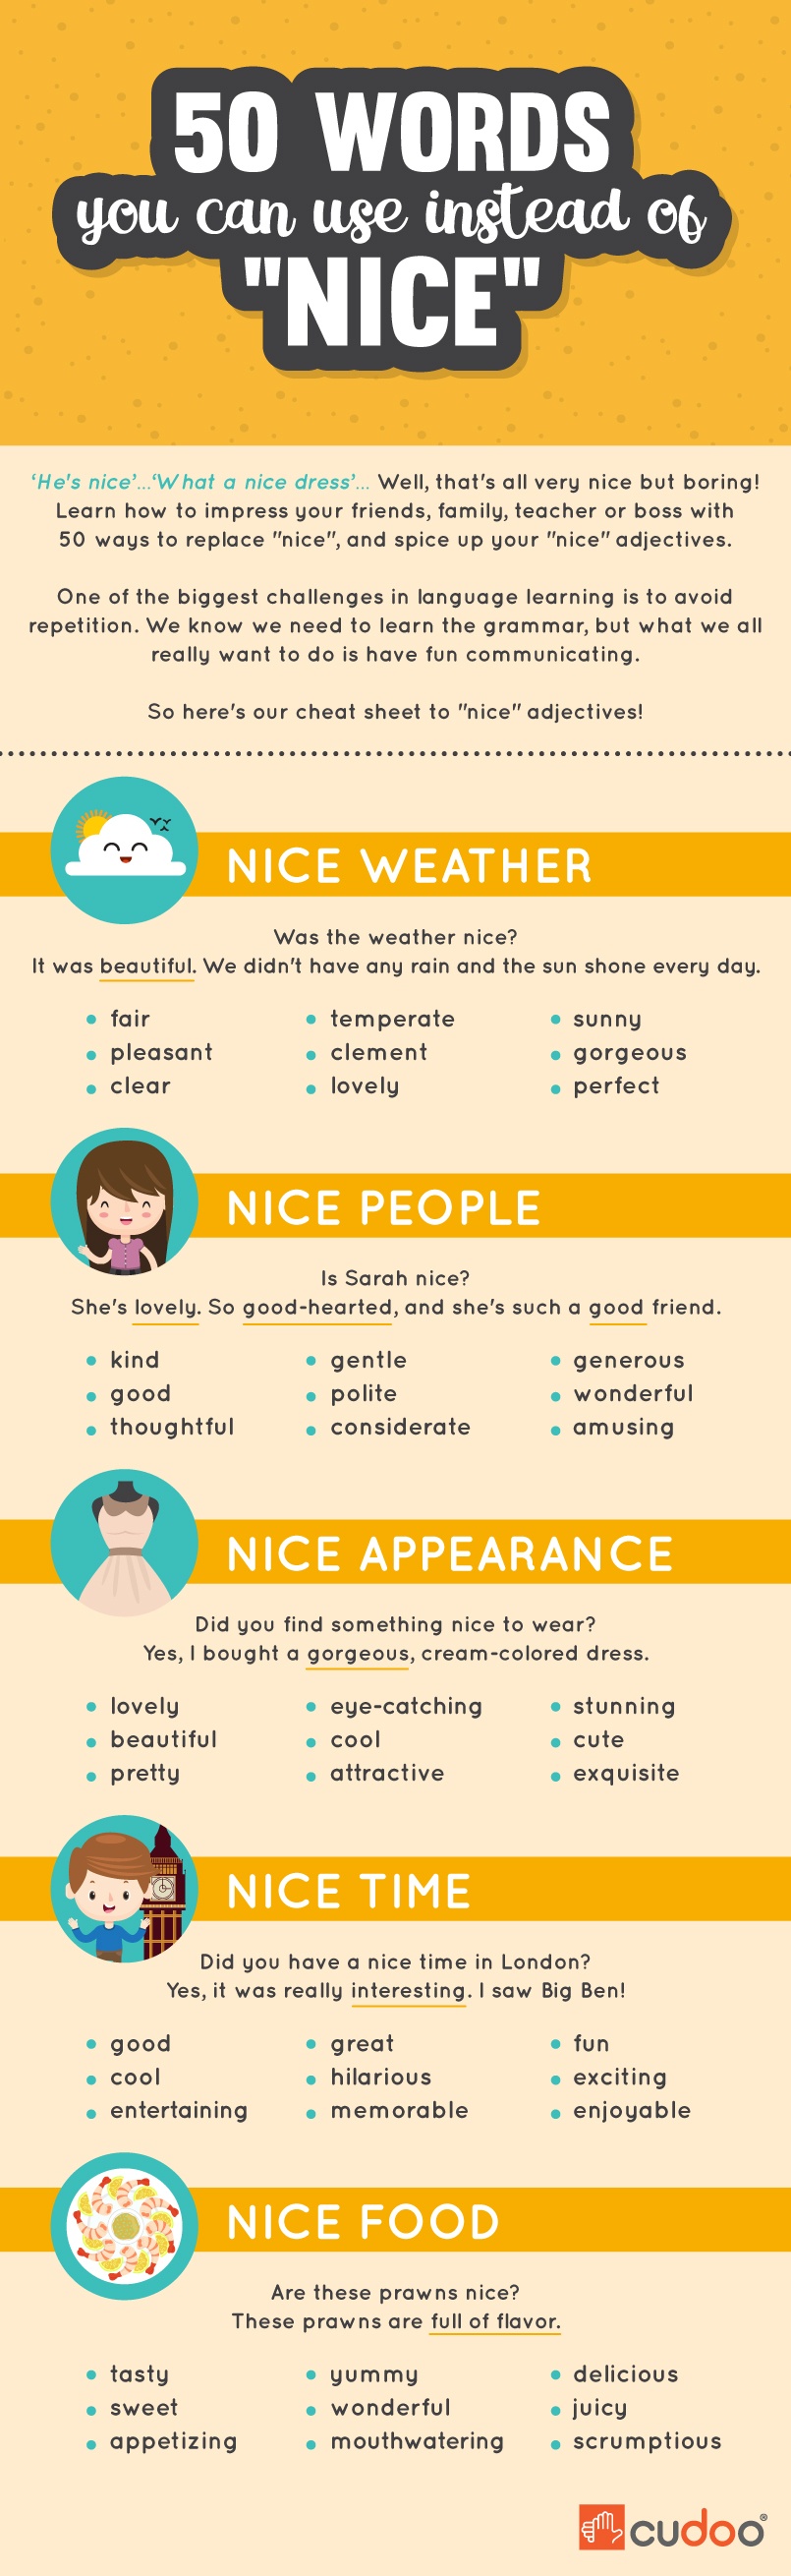 20 Different Words You Can Use Instead of 